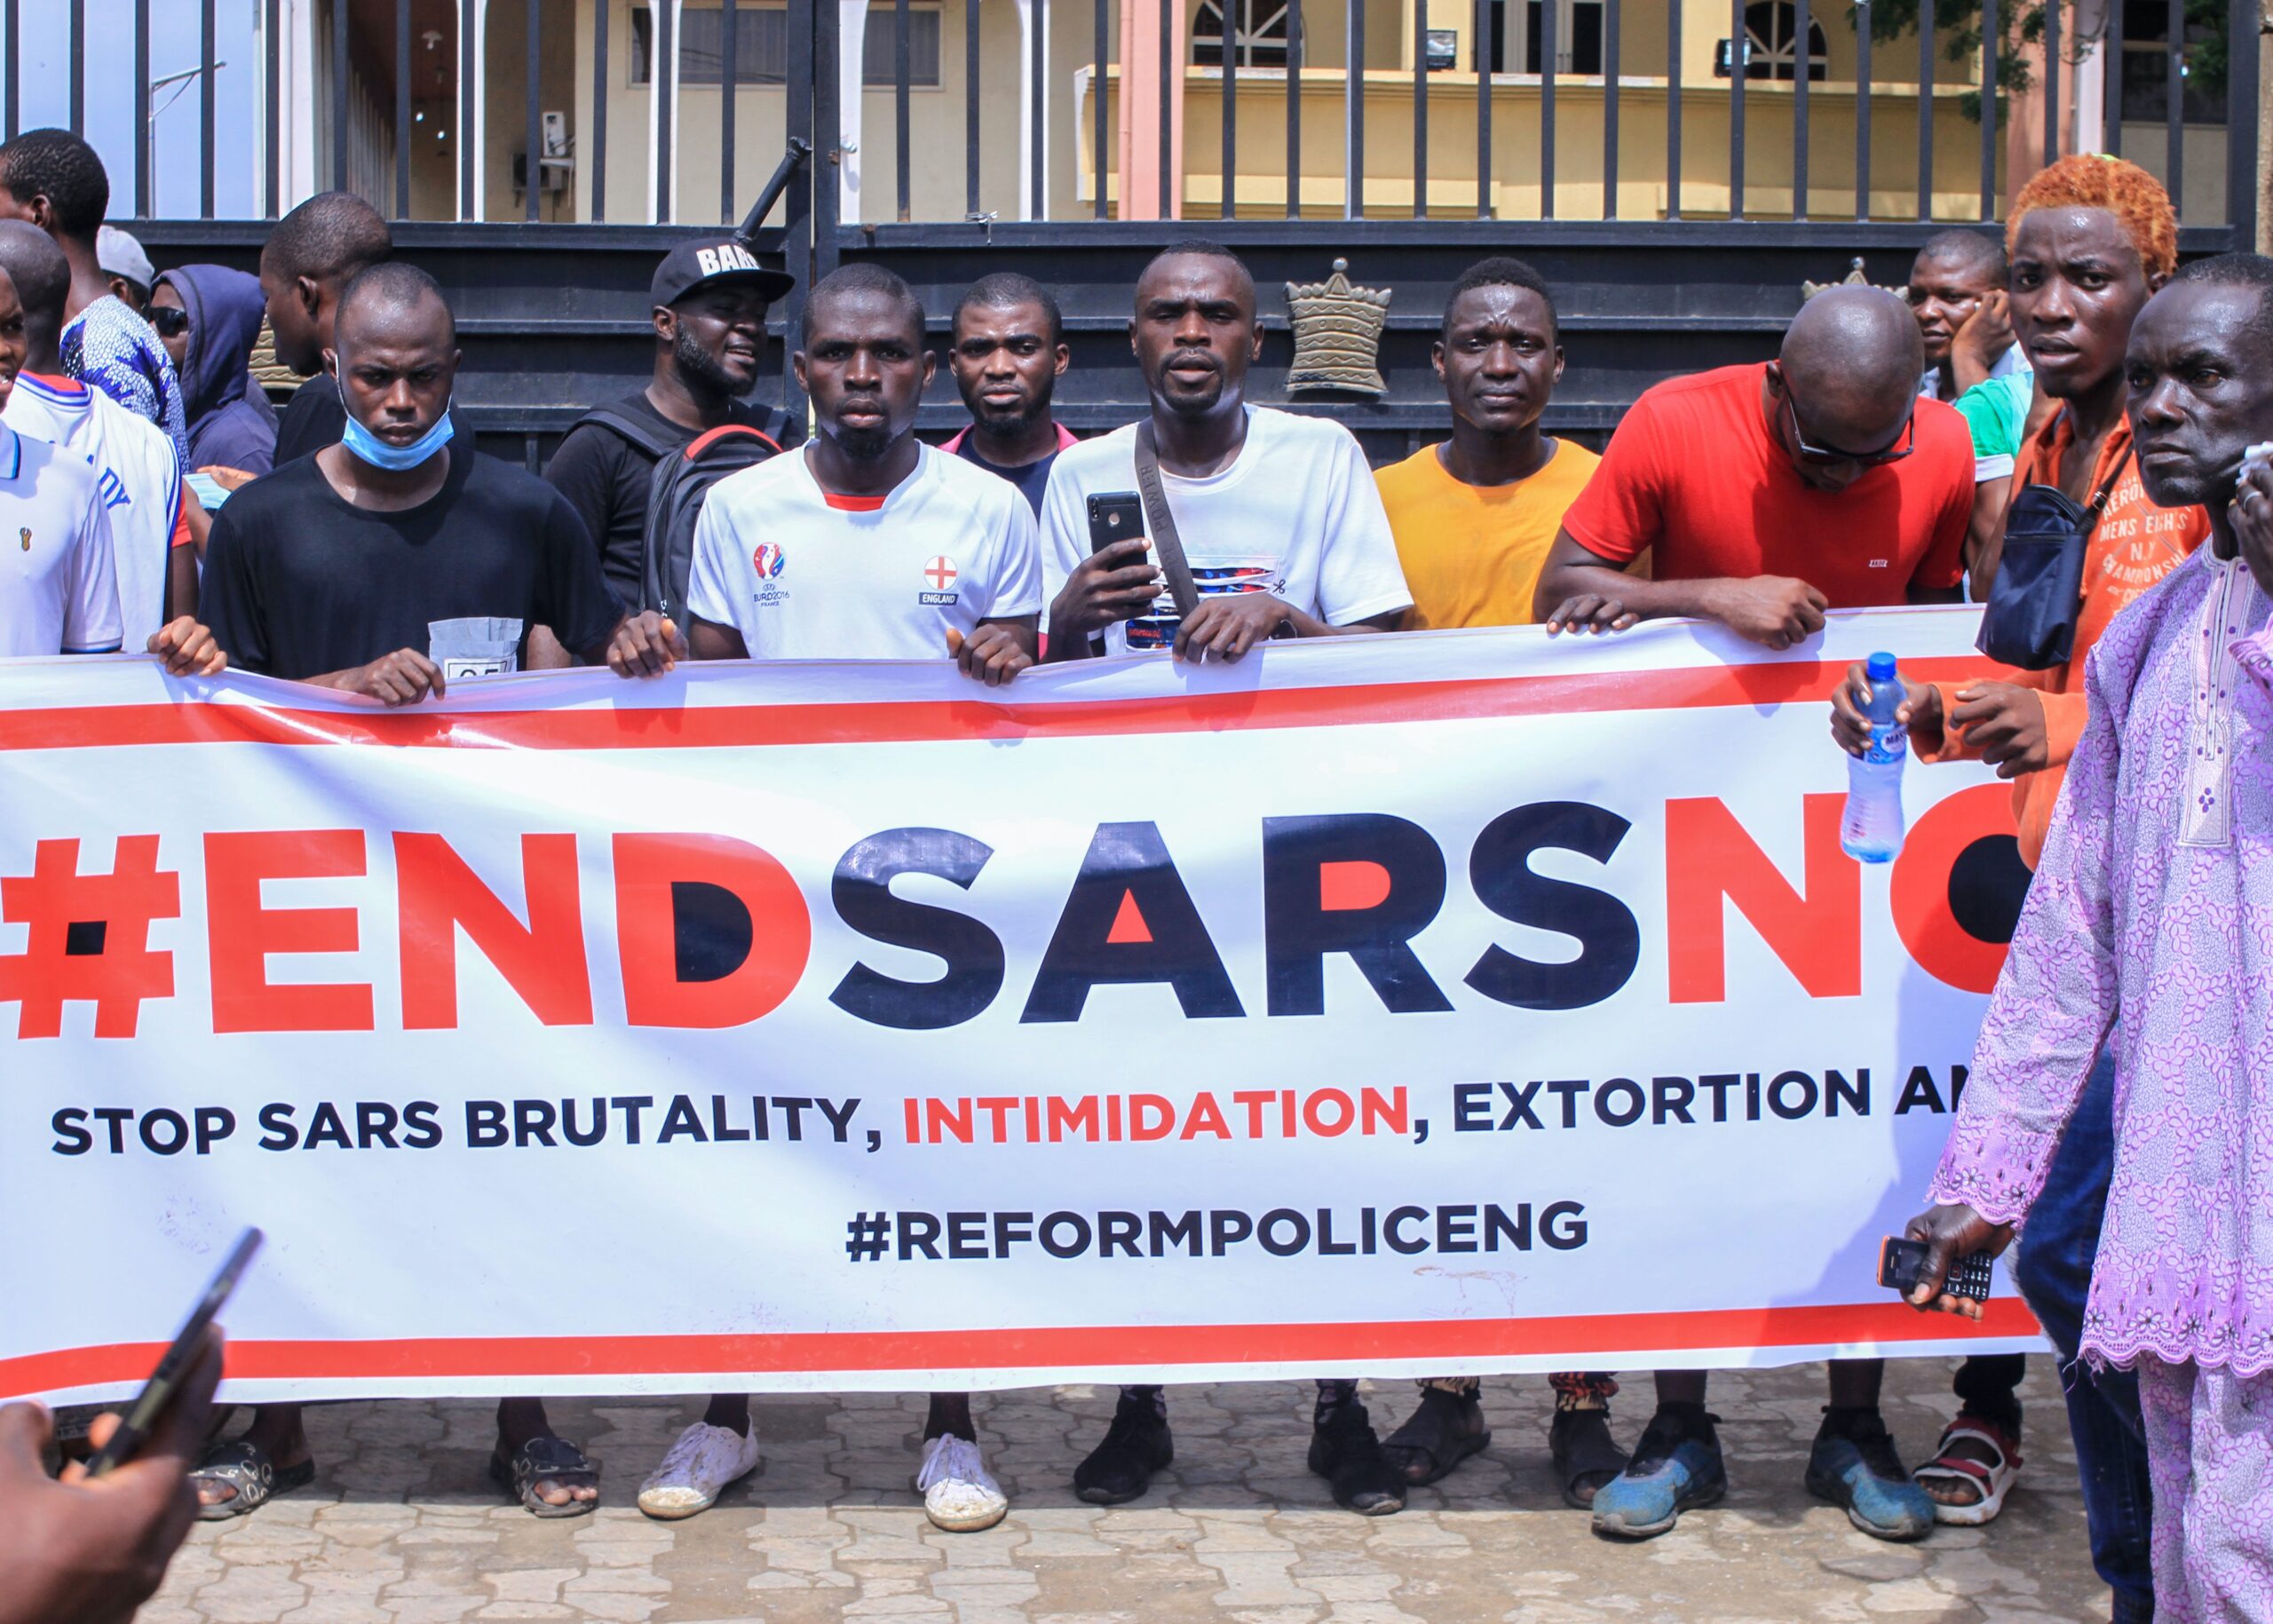 ‘End SARS’ Nigeria’s Fight Against Police Brutality.